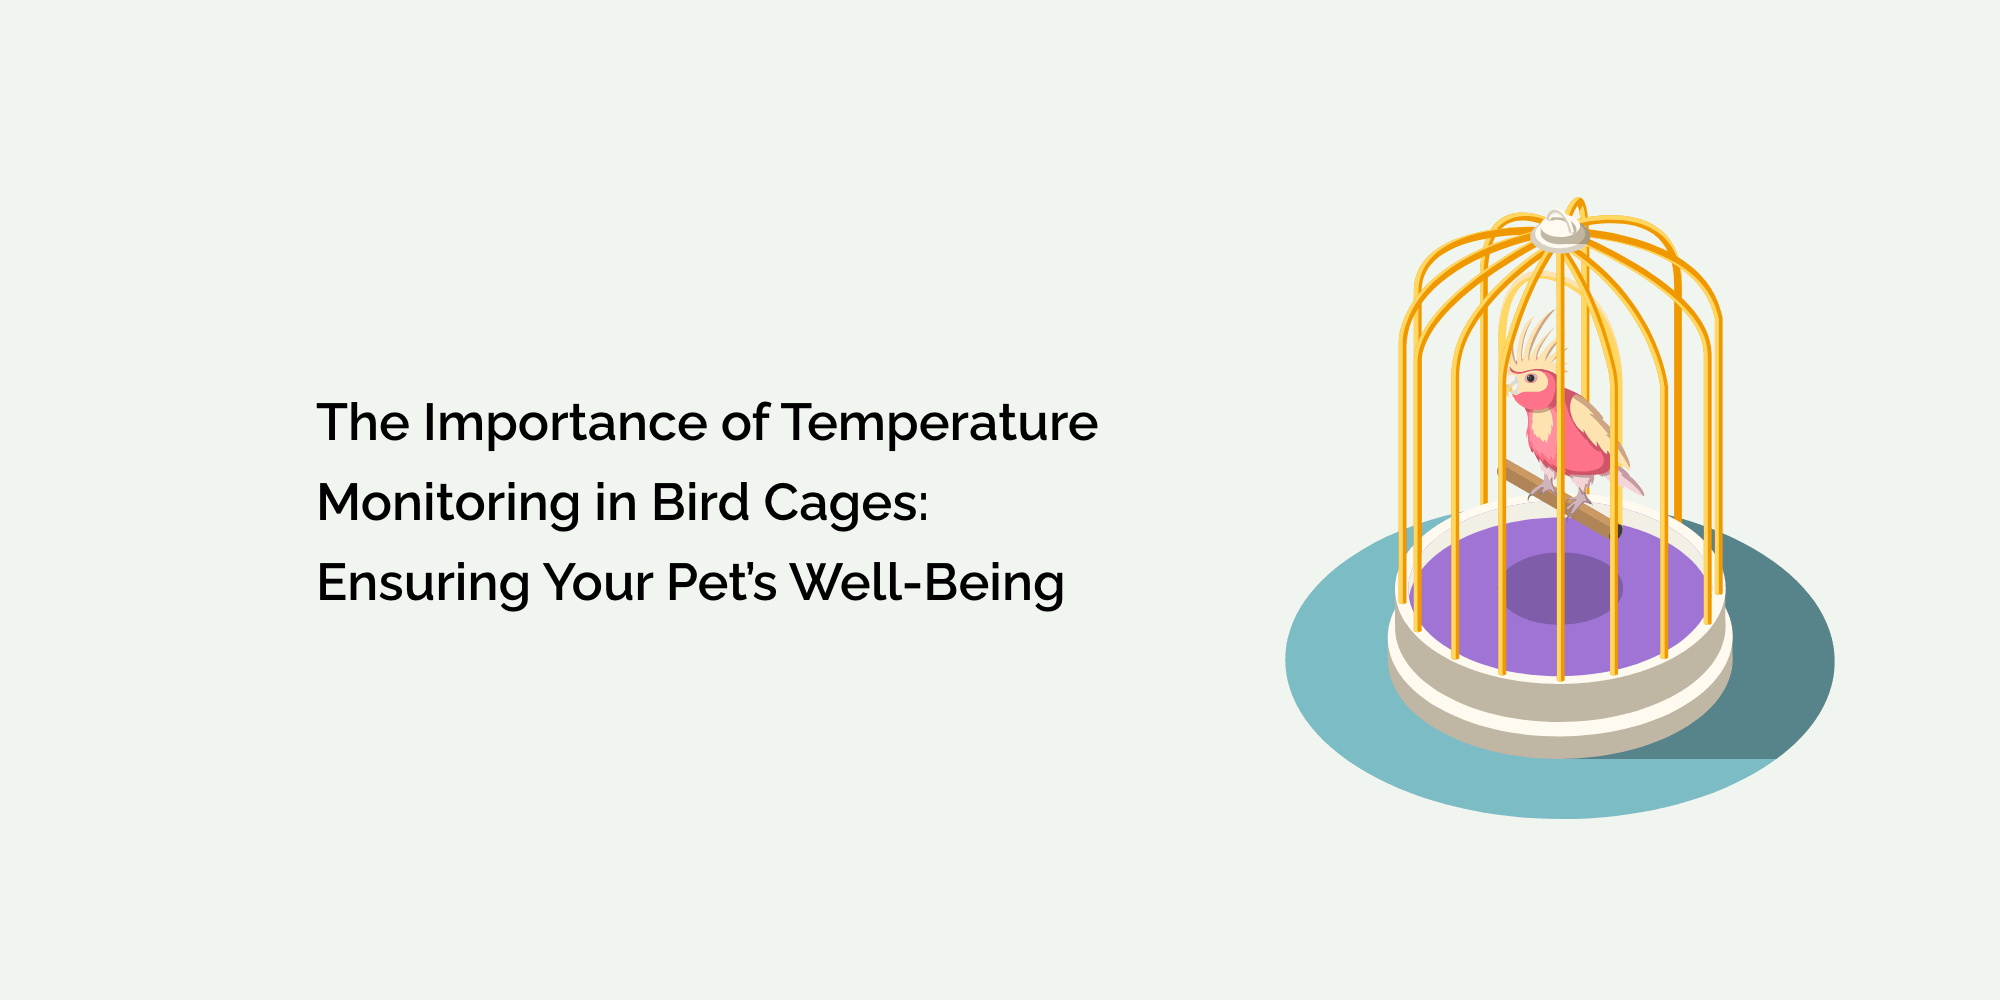 The Importance of Temperature Monitoring in Bird Cages: Ensuring Your Pet's Well-Being